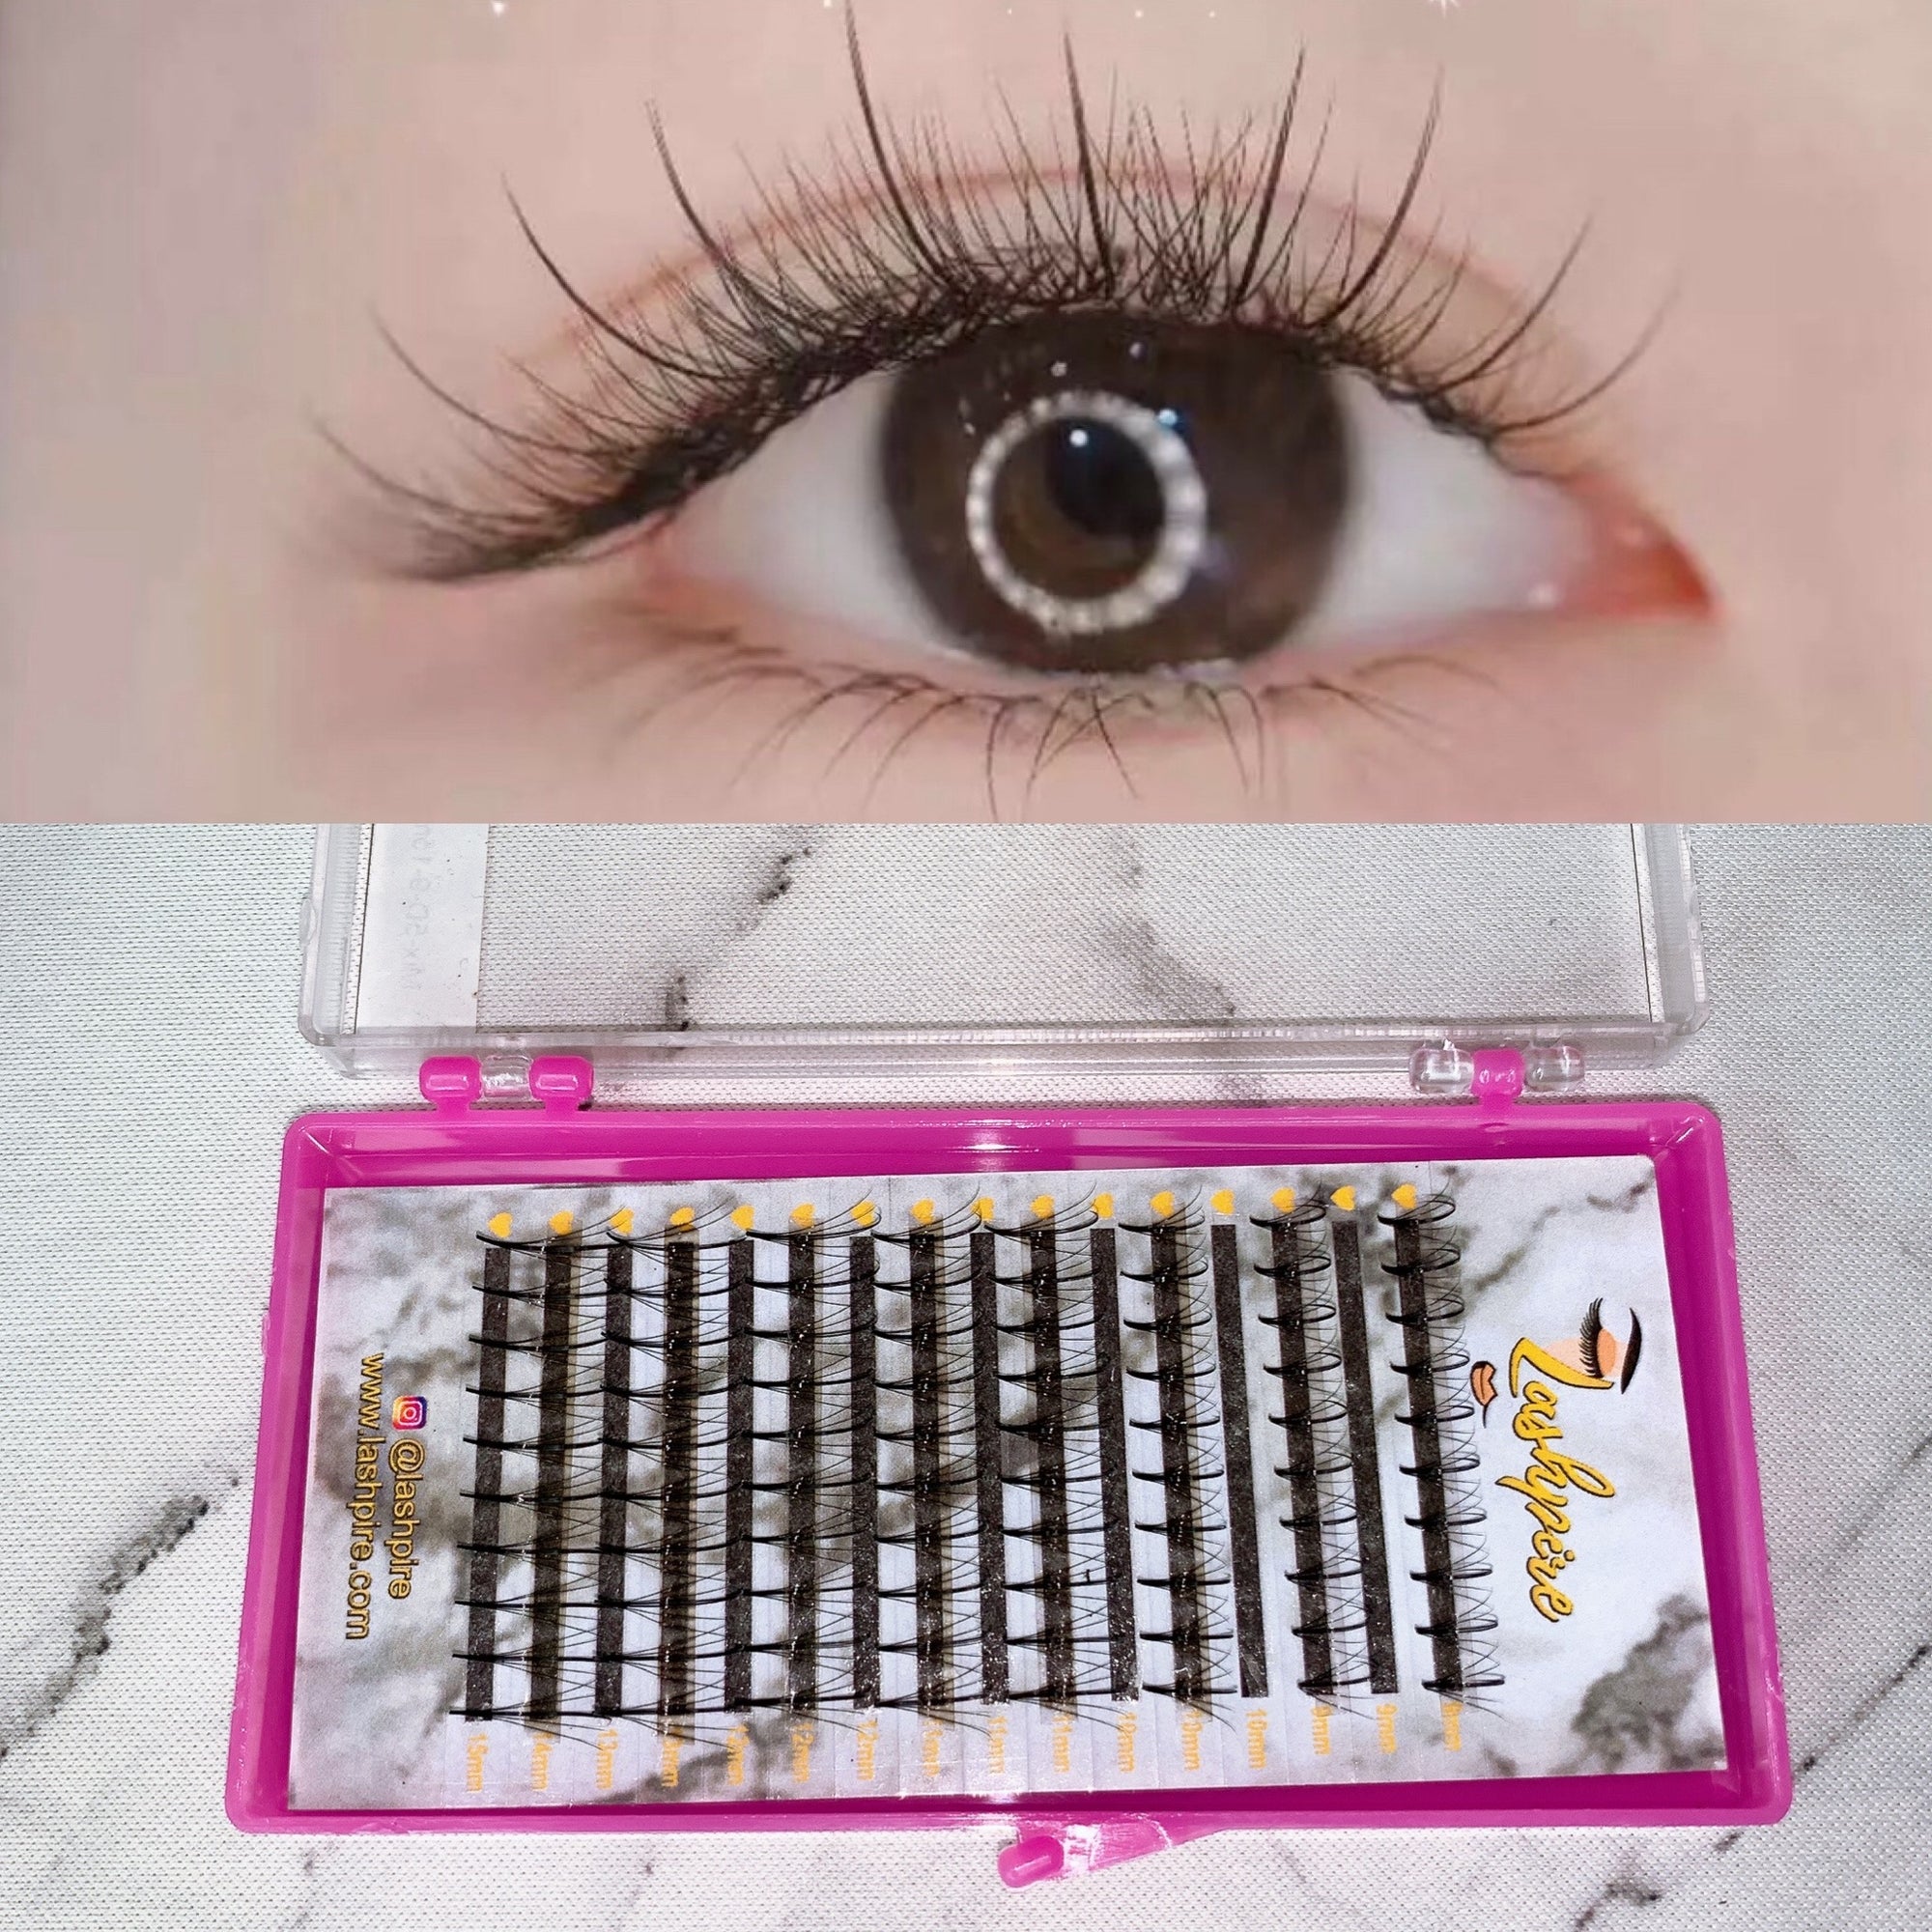 LASHPIRE® ECO COLLECTION 0.07mm MIX LENGTH Pro-made Ready made Katun Wispy 5D Premade Spikes Volume Fans Lash Tray